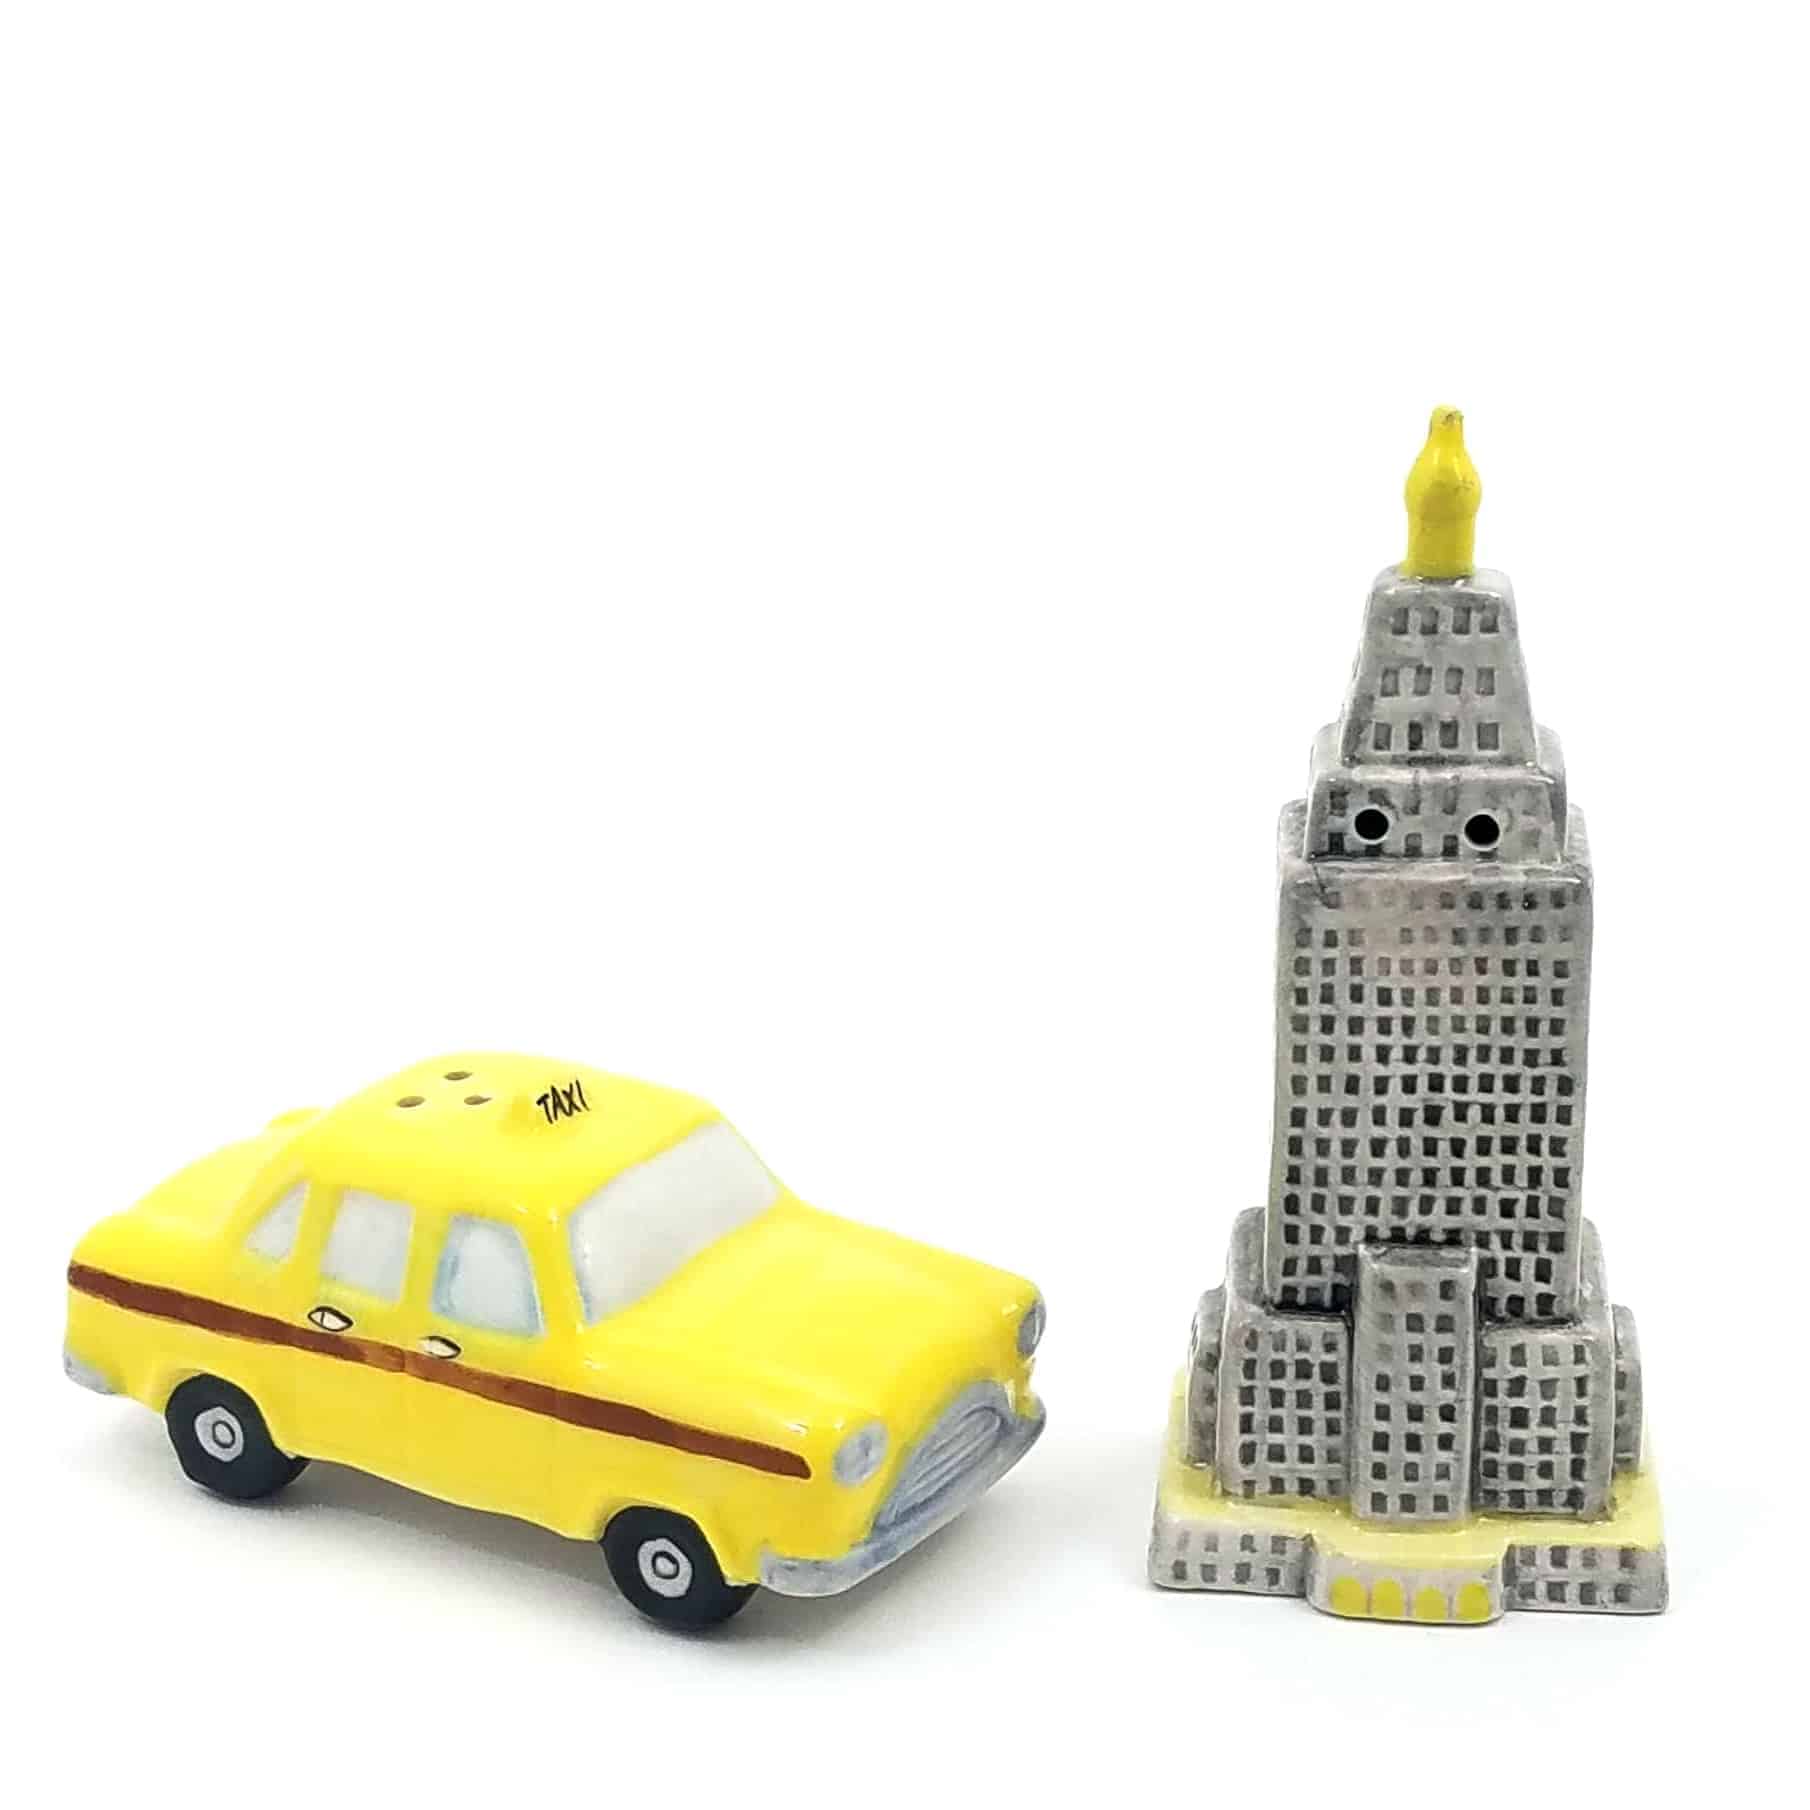 This Salt and Pepper Set of City Living Collectible Decorative is made with love by Premier Homegoods! Shop more unique gift ideas today with Spots Initiatives, the best way to support creators.